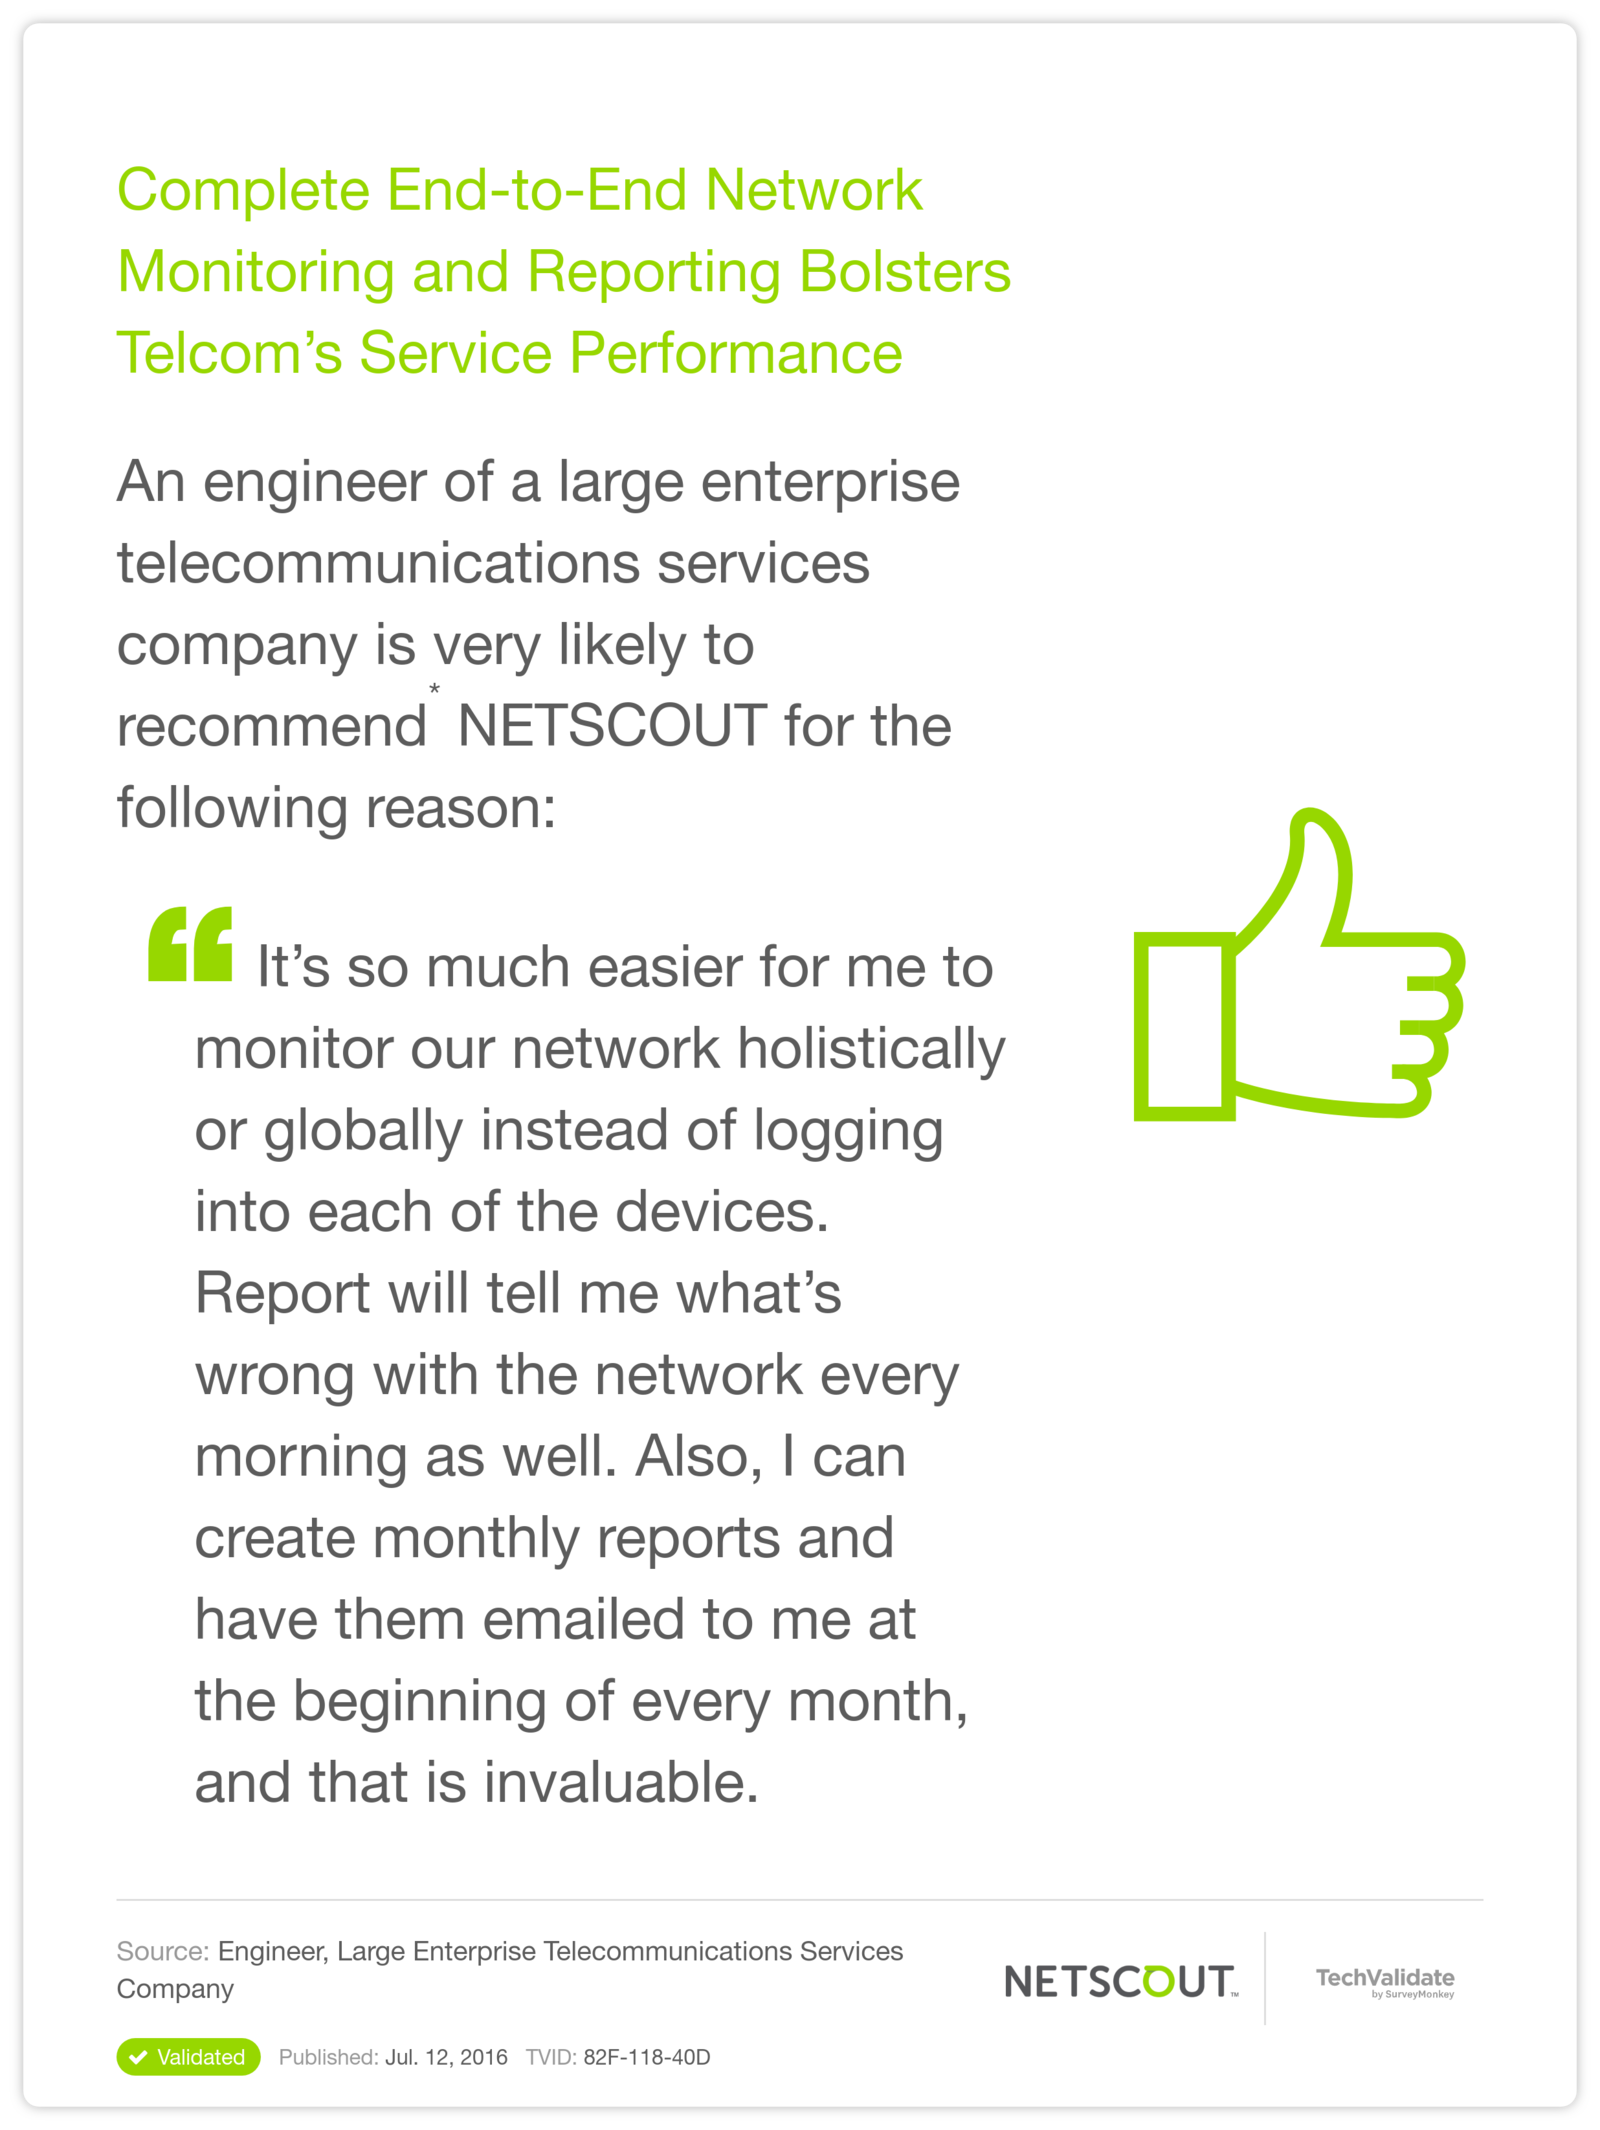 Complete End-to-End Network Monitoring and Reporting Bolsters Telcom's Service Performance